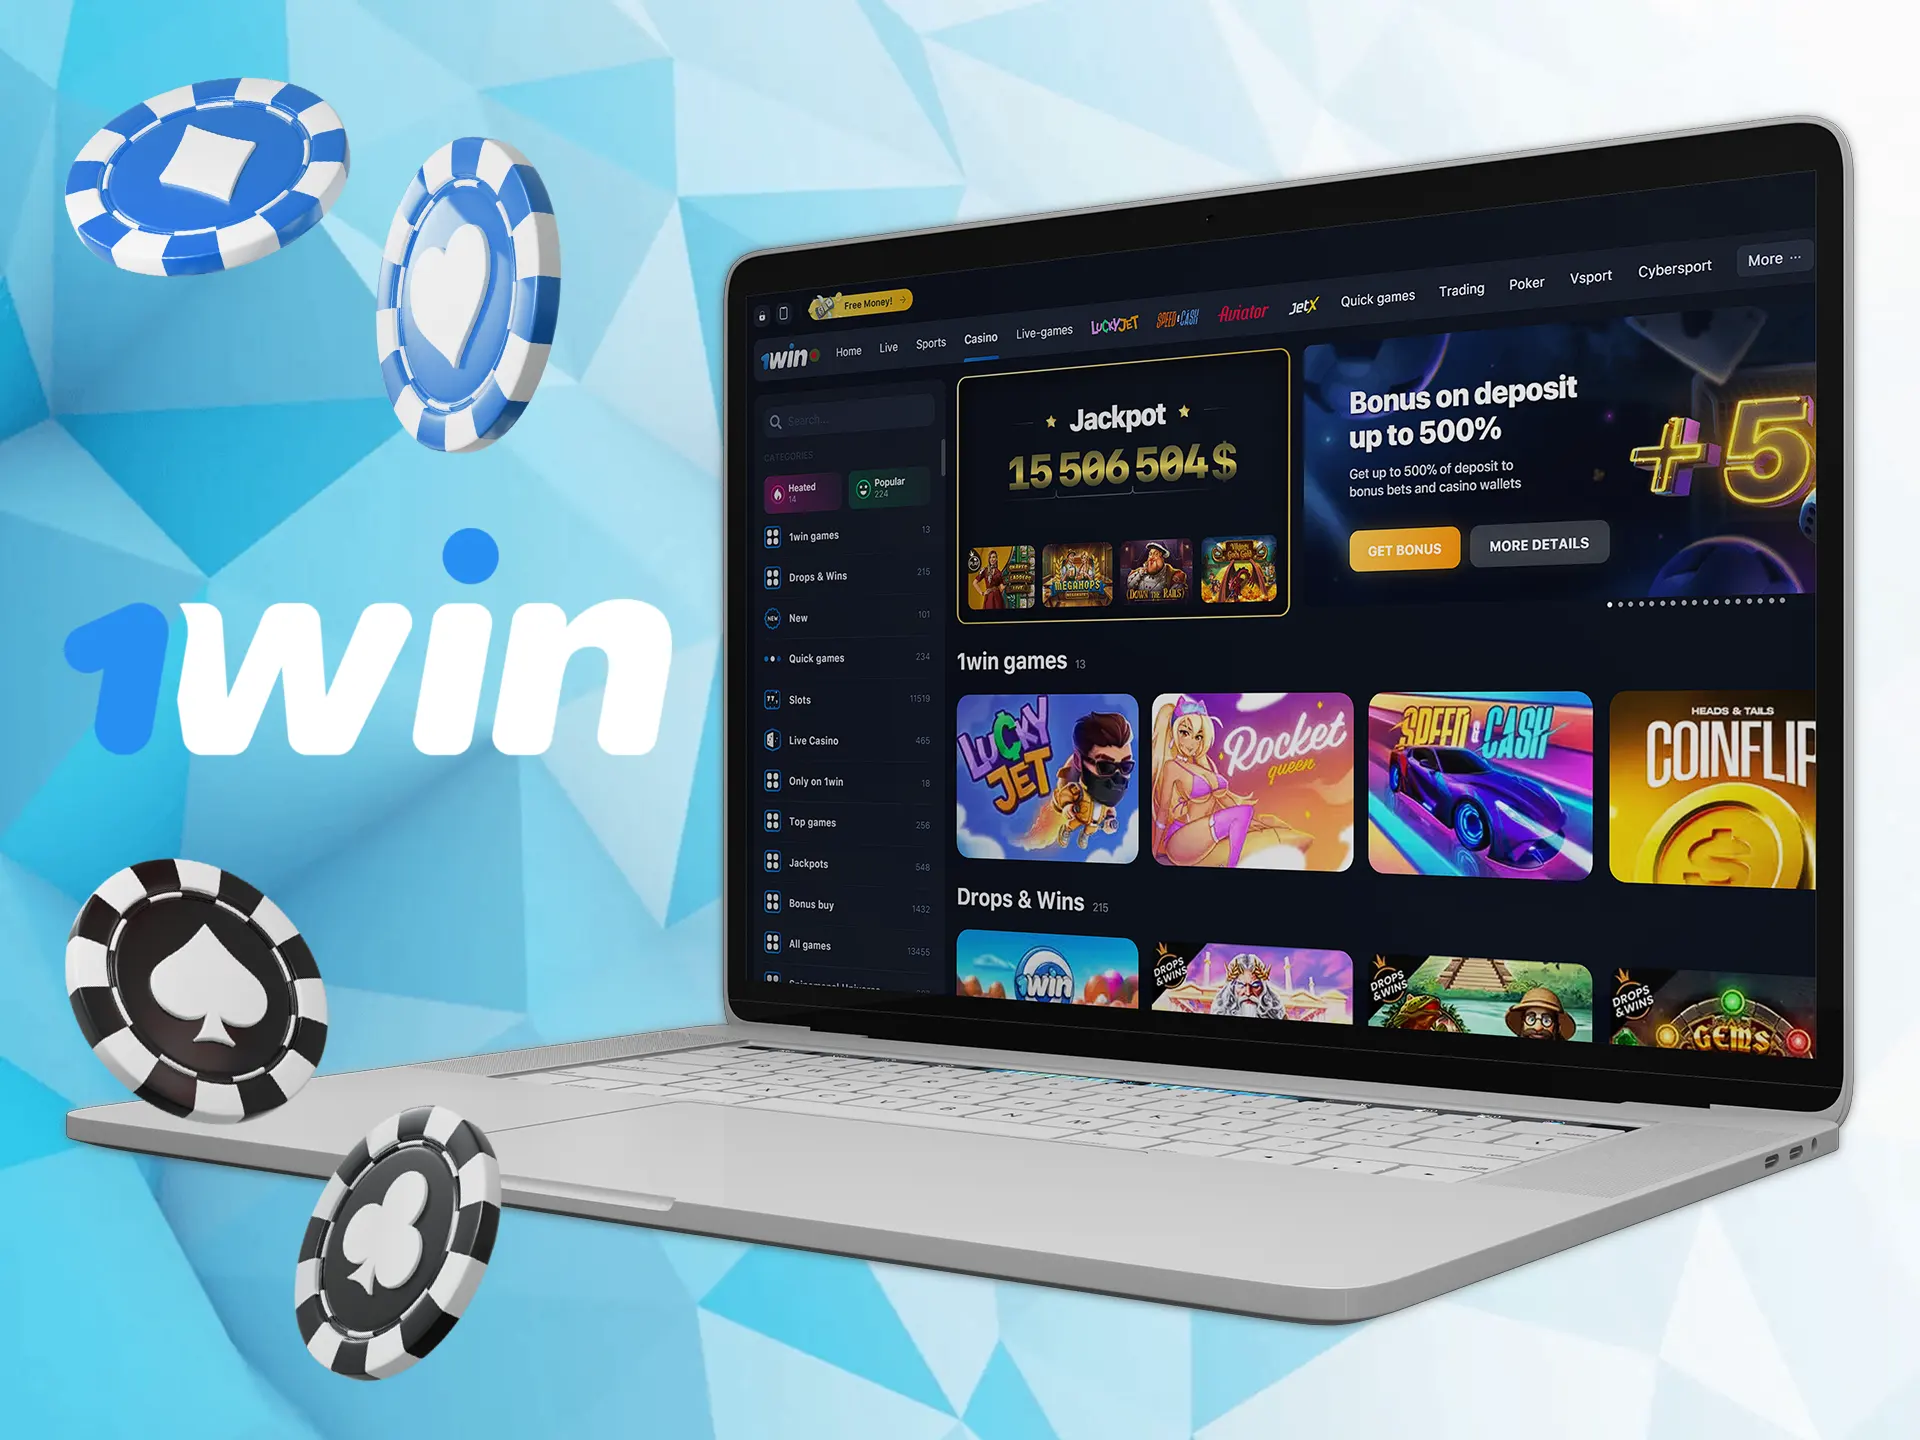 Visit the 1win casino page for a new casino games.